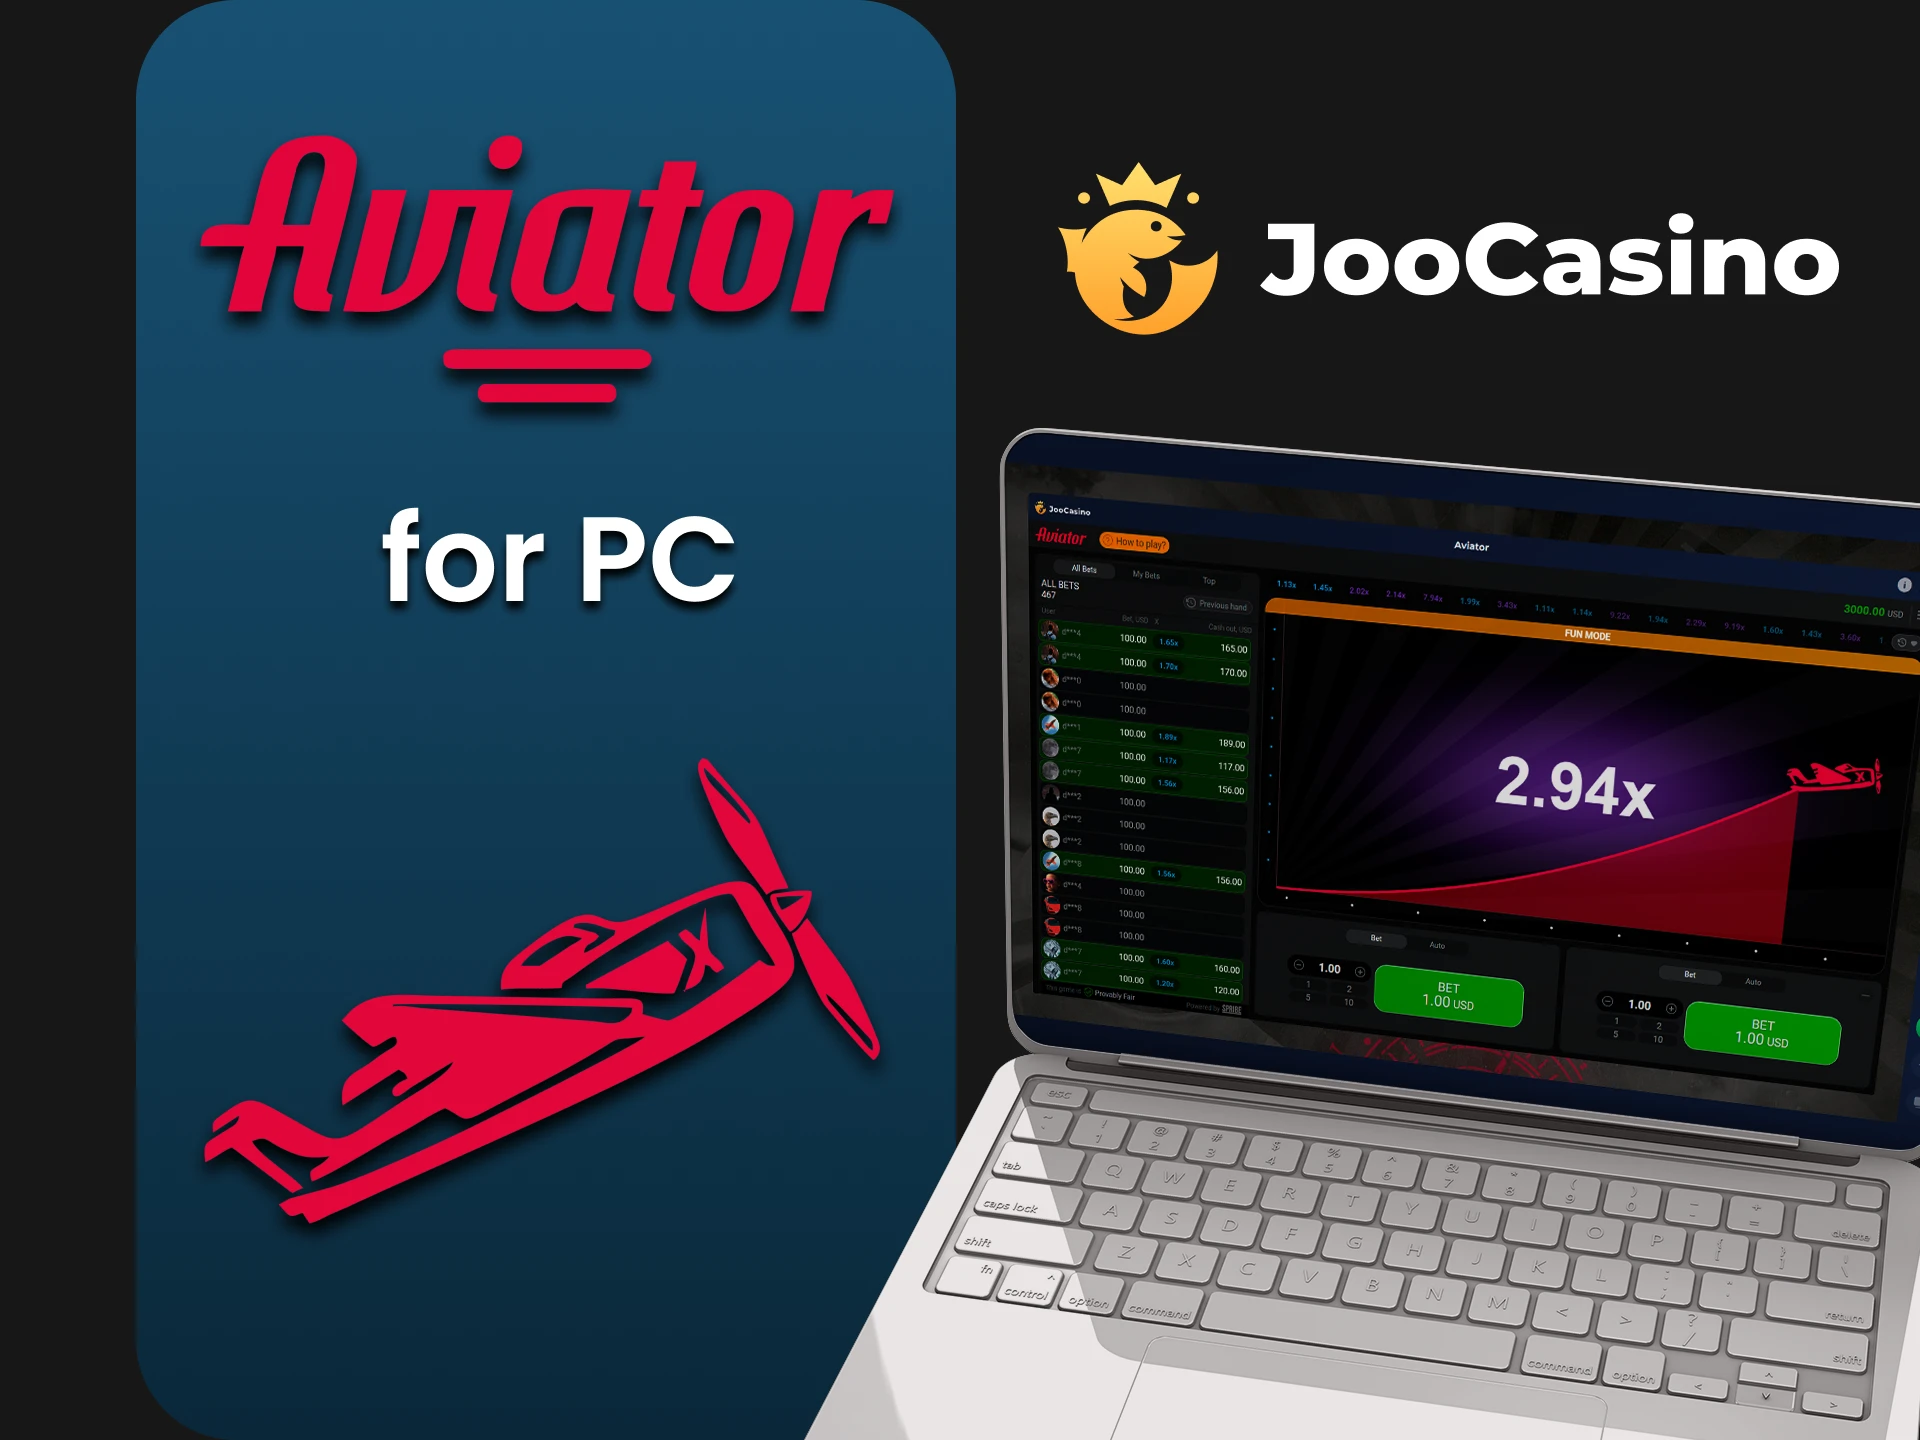 Use the PC version of the site to play Aviator at Joo Casino.